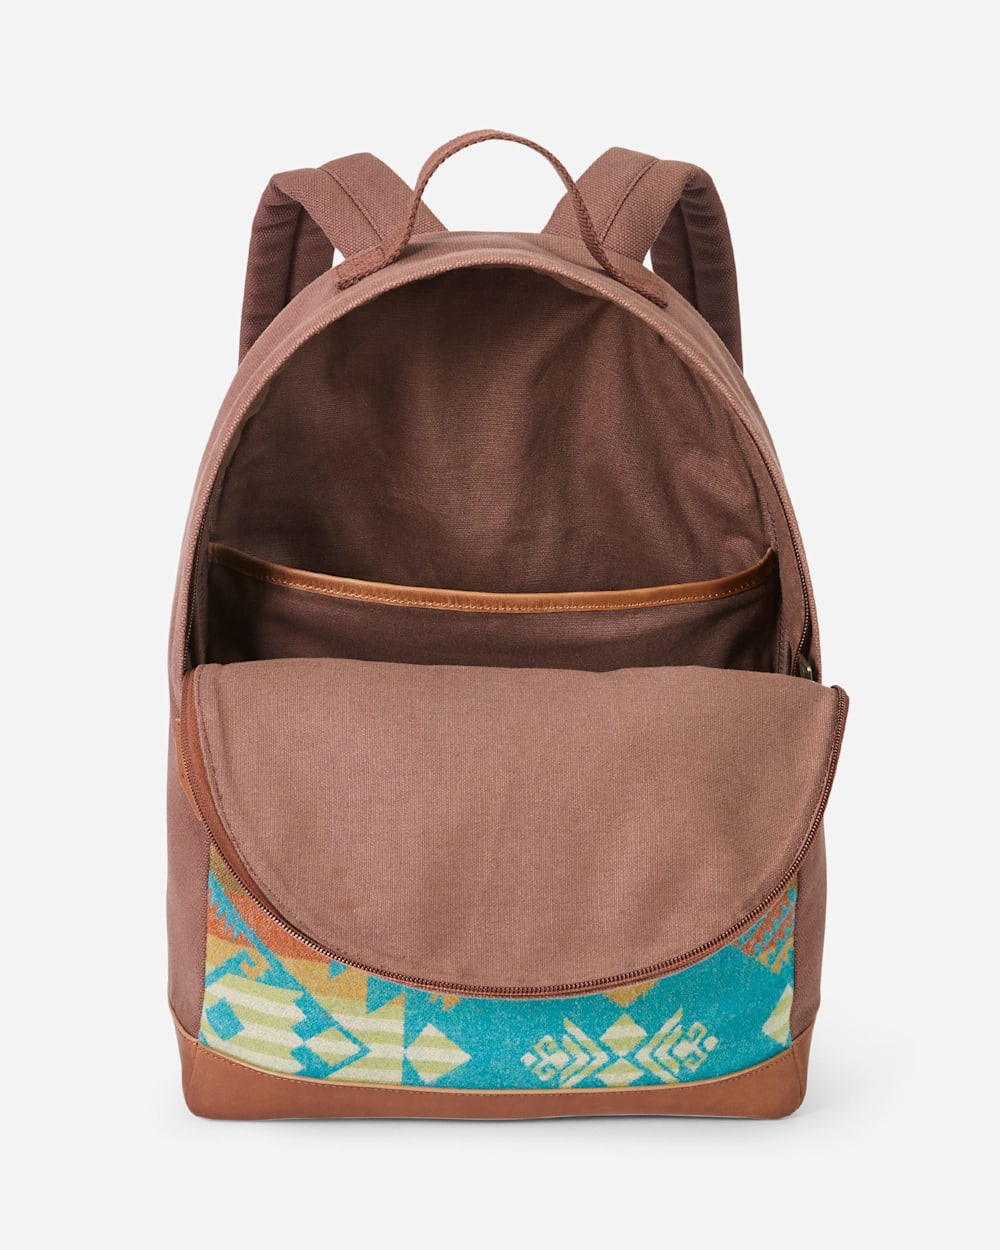 ALTERNATE VIEW OF JOURNEY WEST CANVAS BACKPACK IN TURQUOISE image number 3